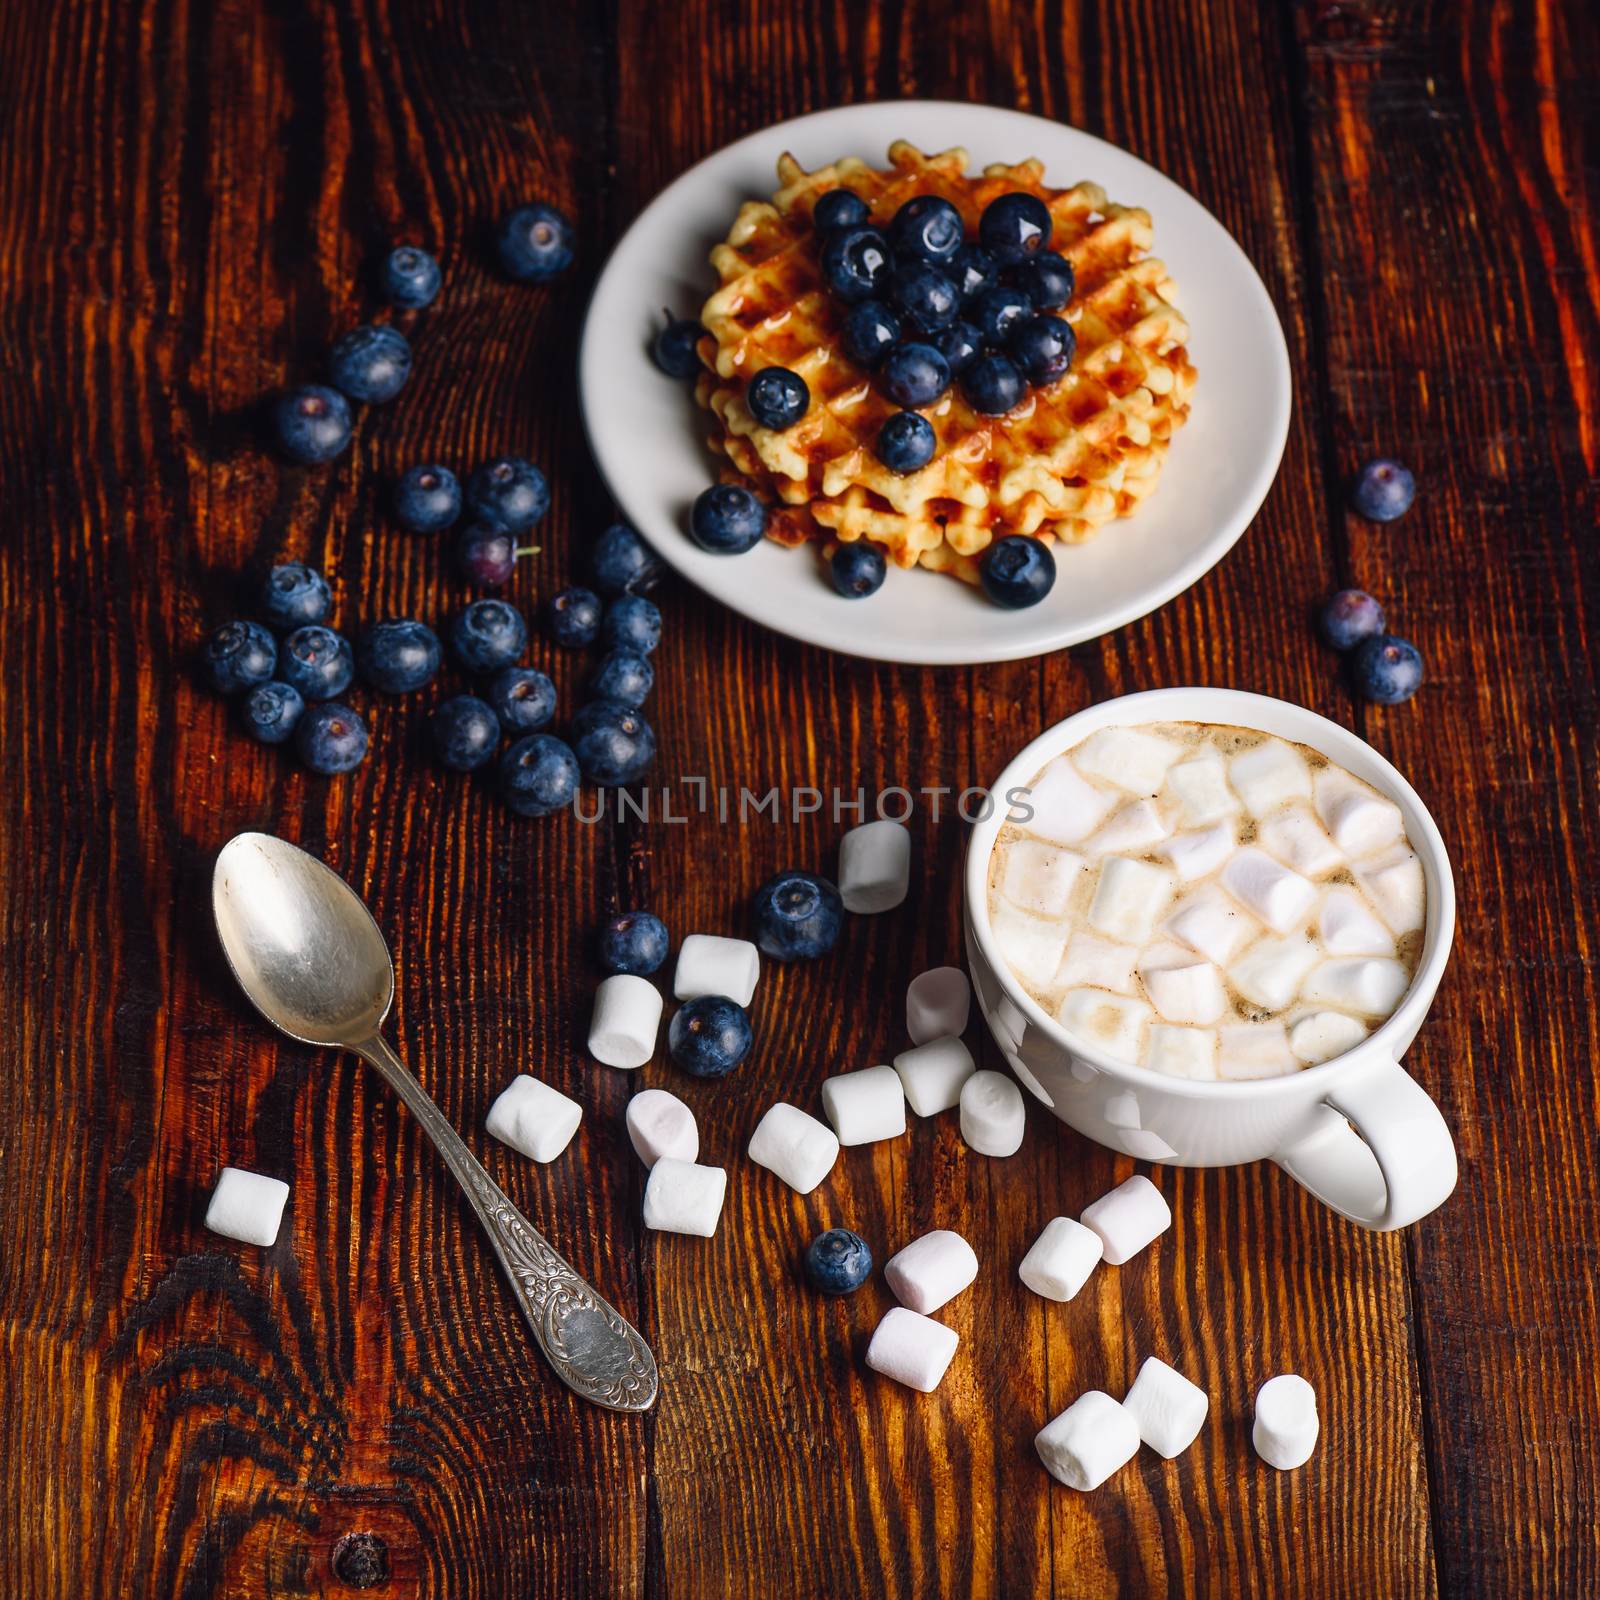 Waffles with Blueberry and Cup of Coffee. by Seva_blsv